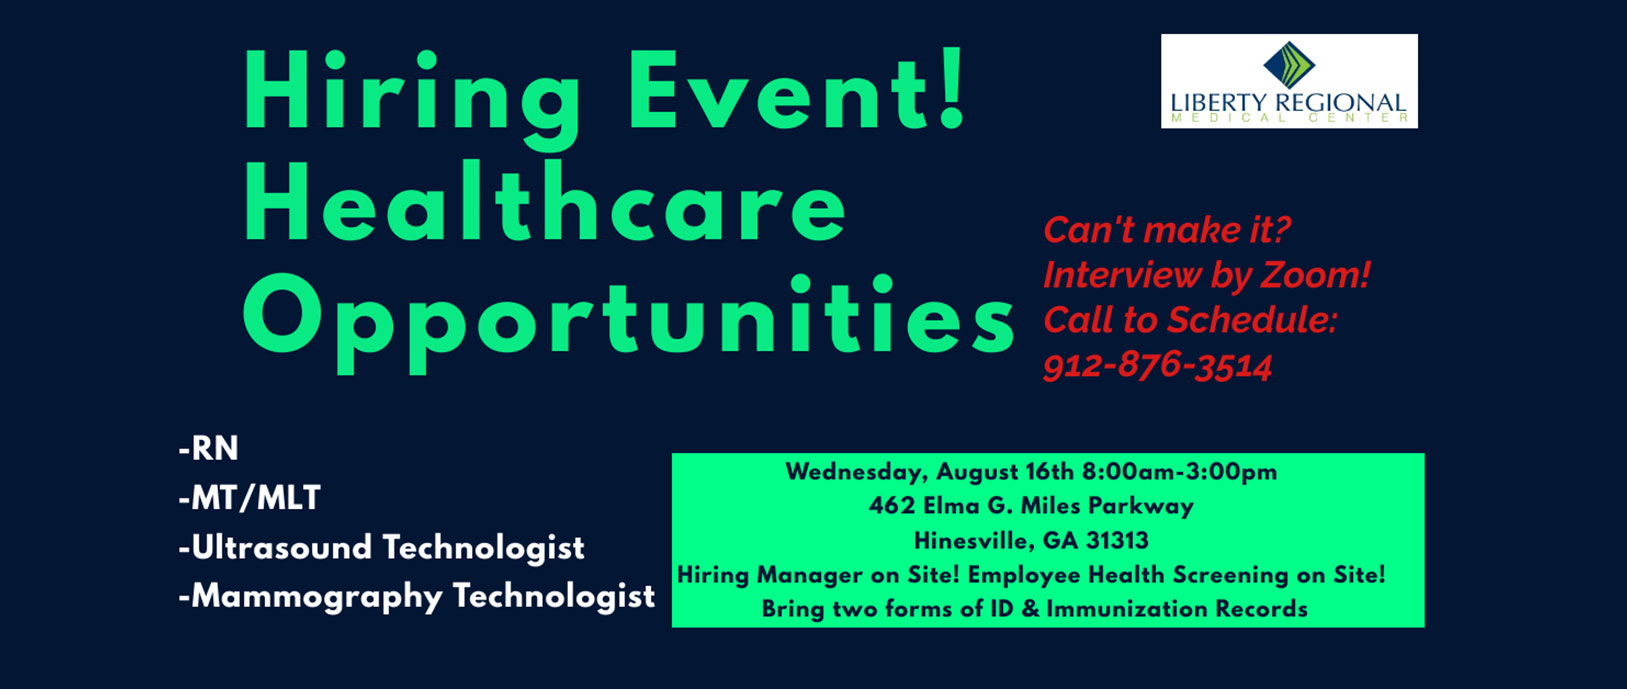 Hiring Event!

Healthcare Opportunities

Can't make it? Interview by Zoom! Call to schedule 912-876-3514 

Wednesday, August 16th 8:00am - 3:00pm
462 Elma G. Miles Parkway
Hinesville, GA 31313 

Hiring Manager on site! Employee Health Screening on Site!

Bring two forms of ID & Immunization Records